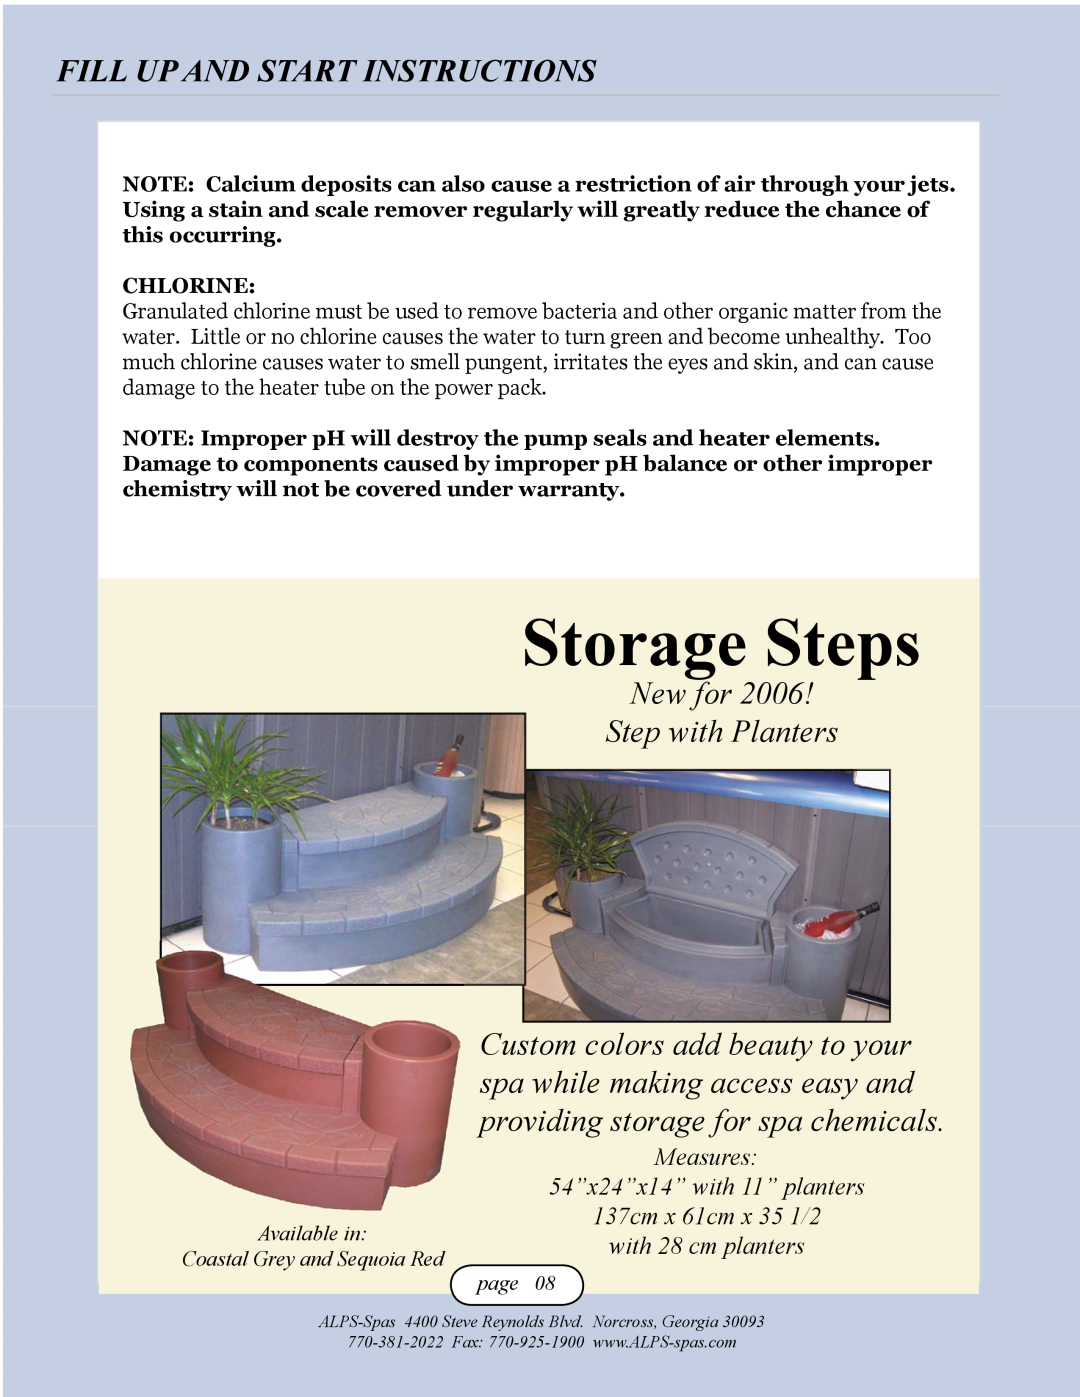 Alps Electric Tigra XLS Storage Steps, Fill Up And Start Instructions, New for Step with Planters, with 28 cm planters 